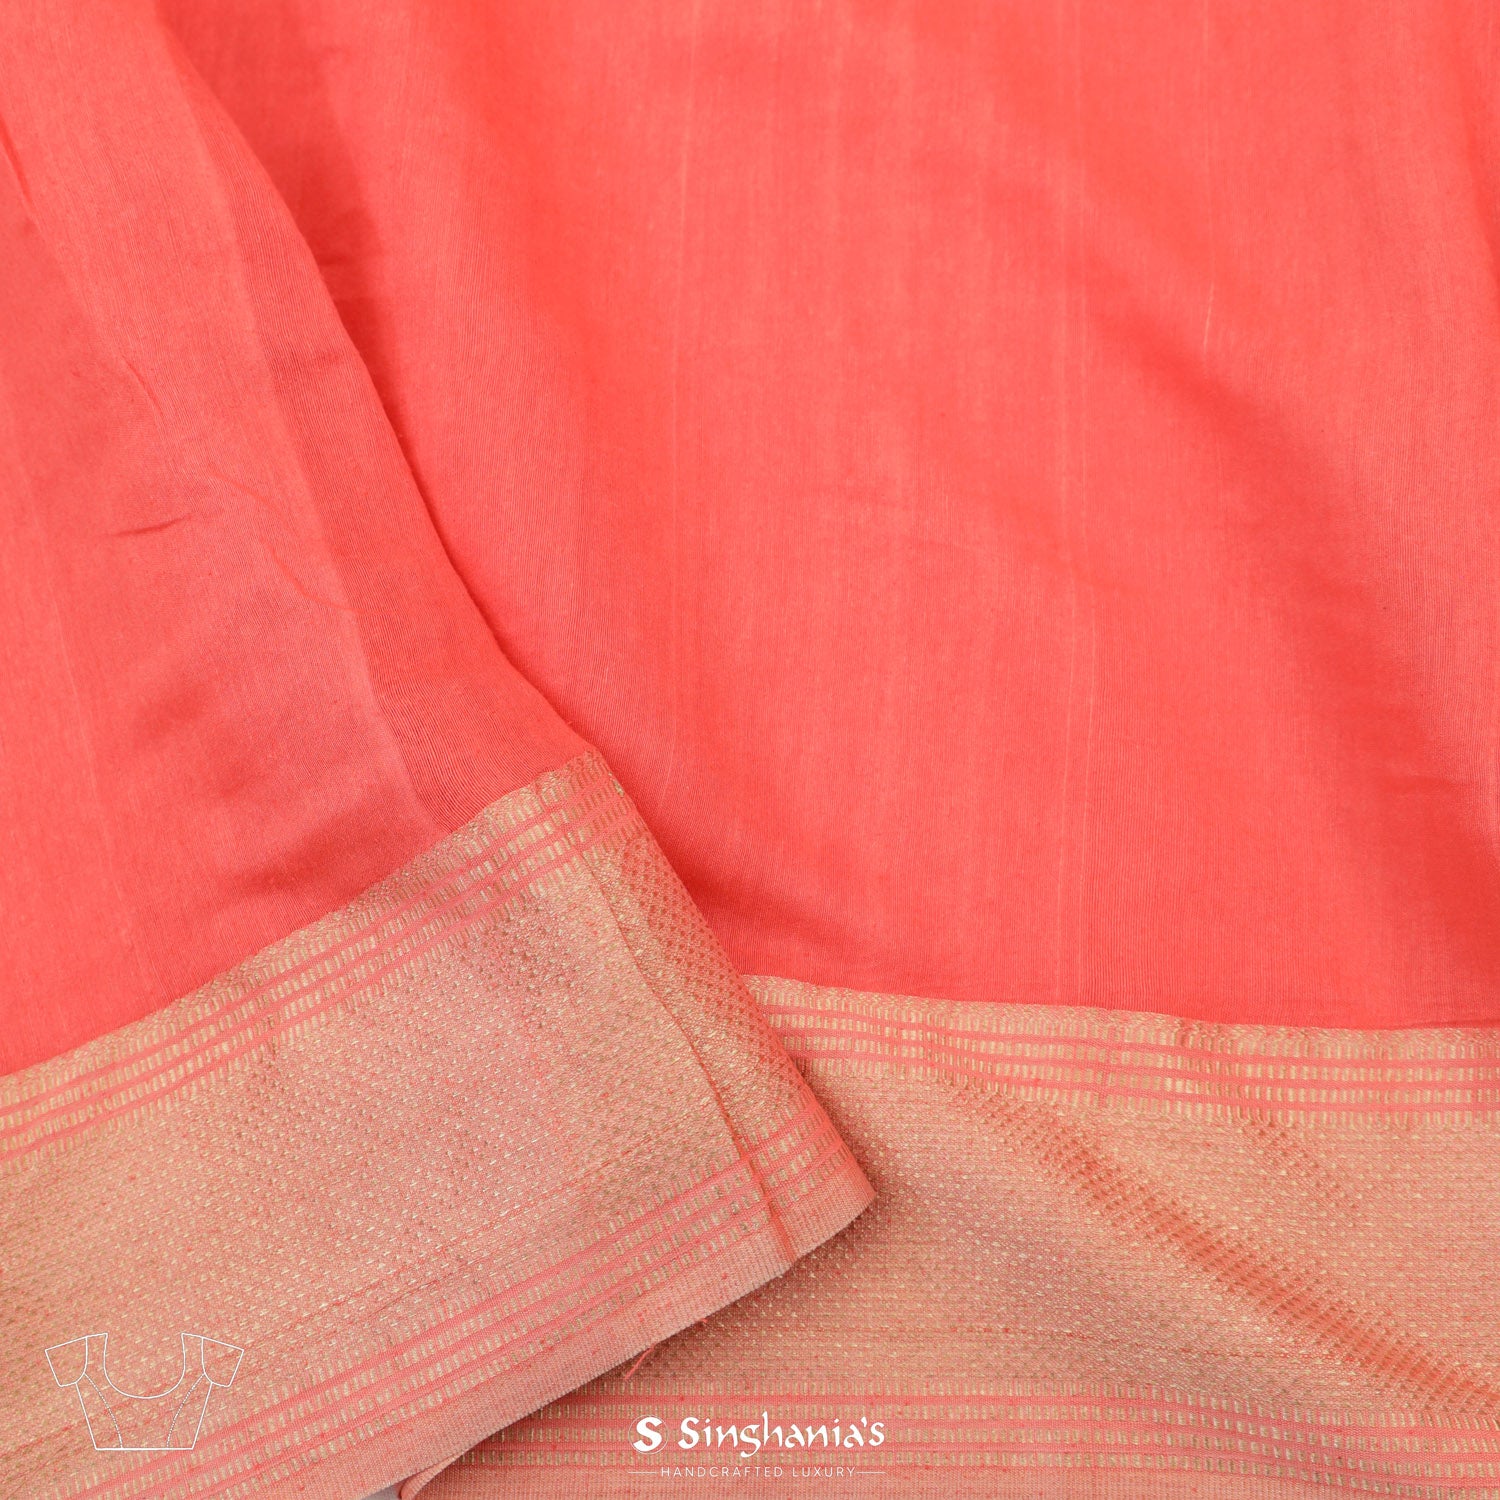 Prismatic Red Linen Saree With Floral Buttis